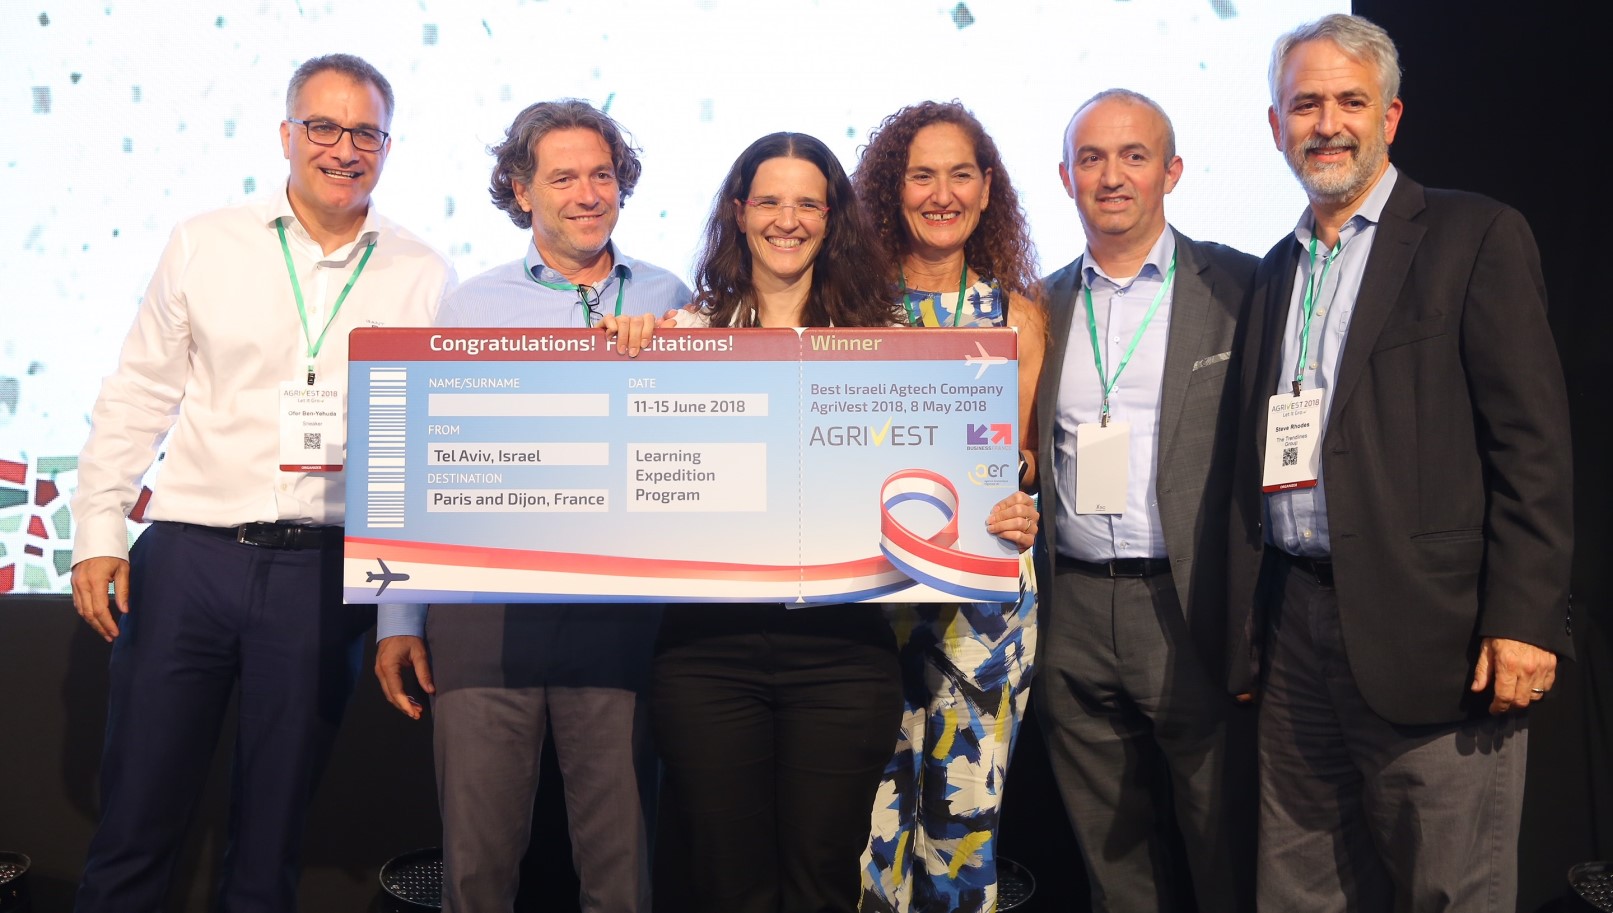 WeedOUT CEO Efrat Lidor, third from left, accepting the top prize in the Best Israeli Agtech Company Competition at AgriVest 2018 from Ofer Ben-Yehuda (Shibolet), Oded Distel (Israel NewTech), Nitza Kardish (Trendlines), Gideon Soesman (GreenSoil) and Steve Rhodes (Trendlines). Photo by Yanai Rubaja